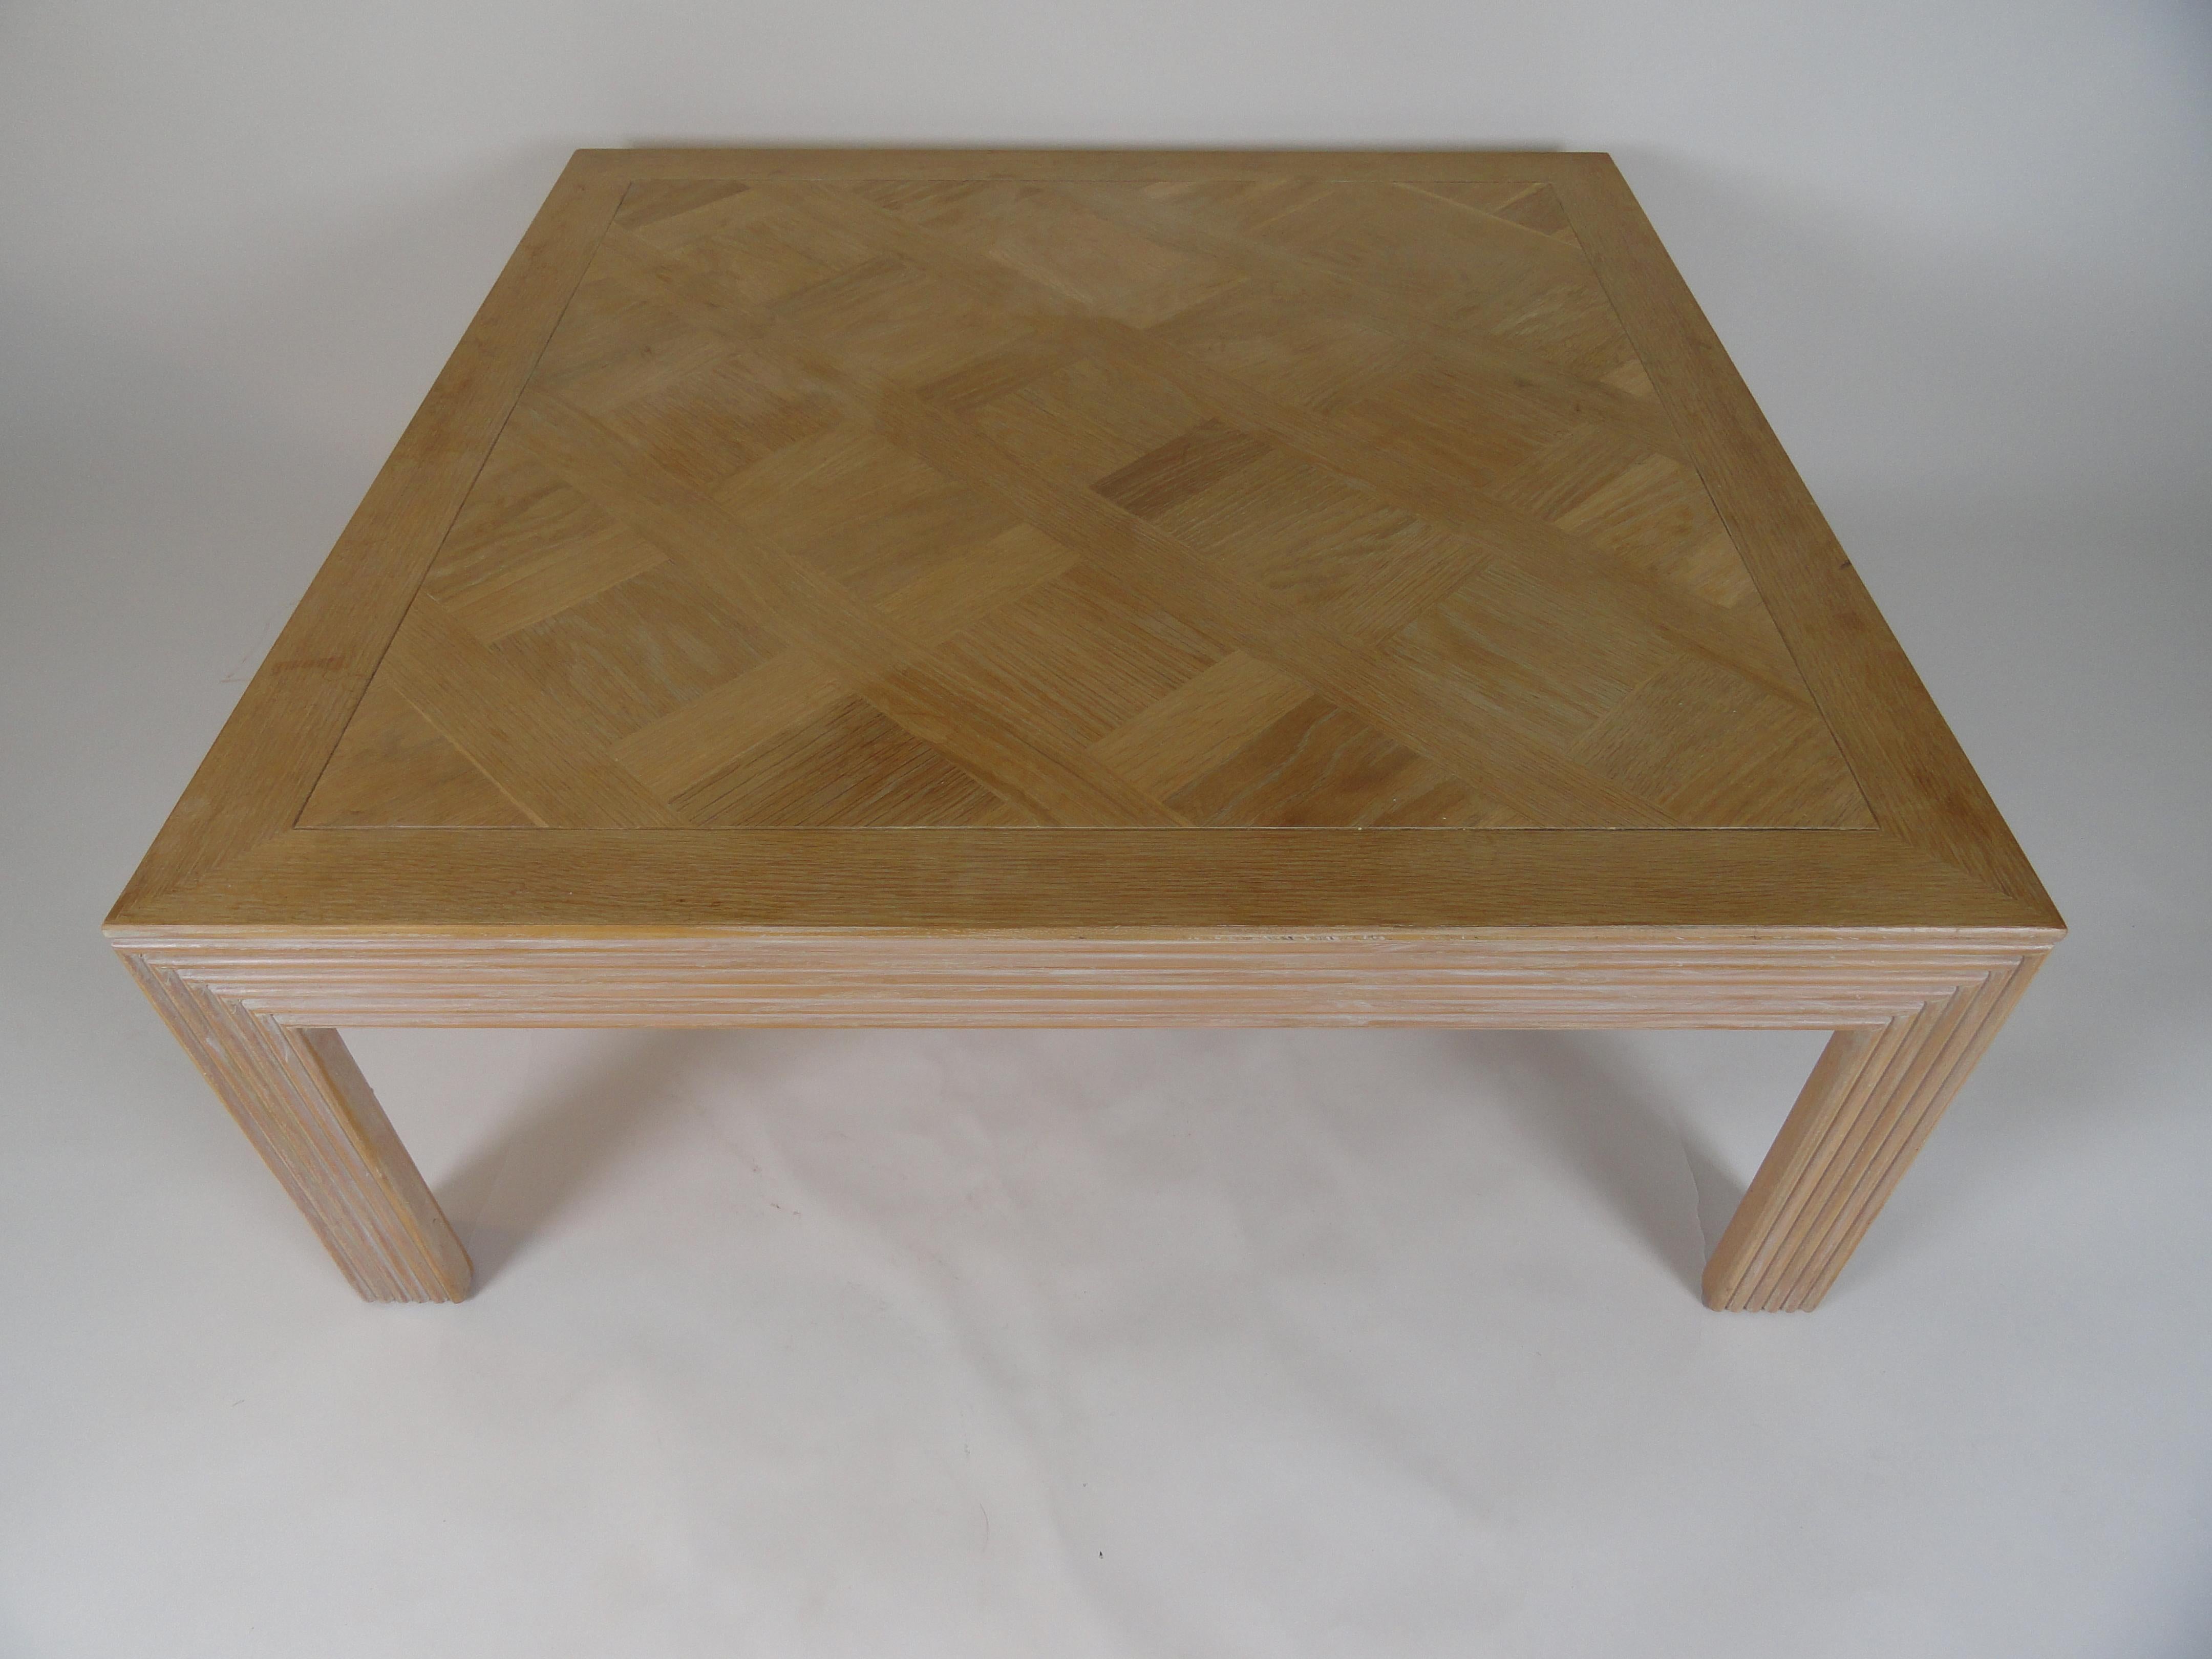 Square Lane Furniture inlaid bleached wood coffee table with fluted wood leg detail.
Stamped on bottom. Bleached top shows slight variations in finish across the piece.